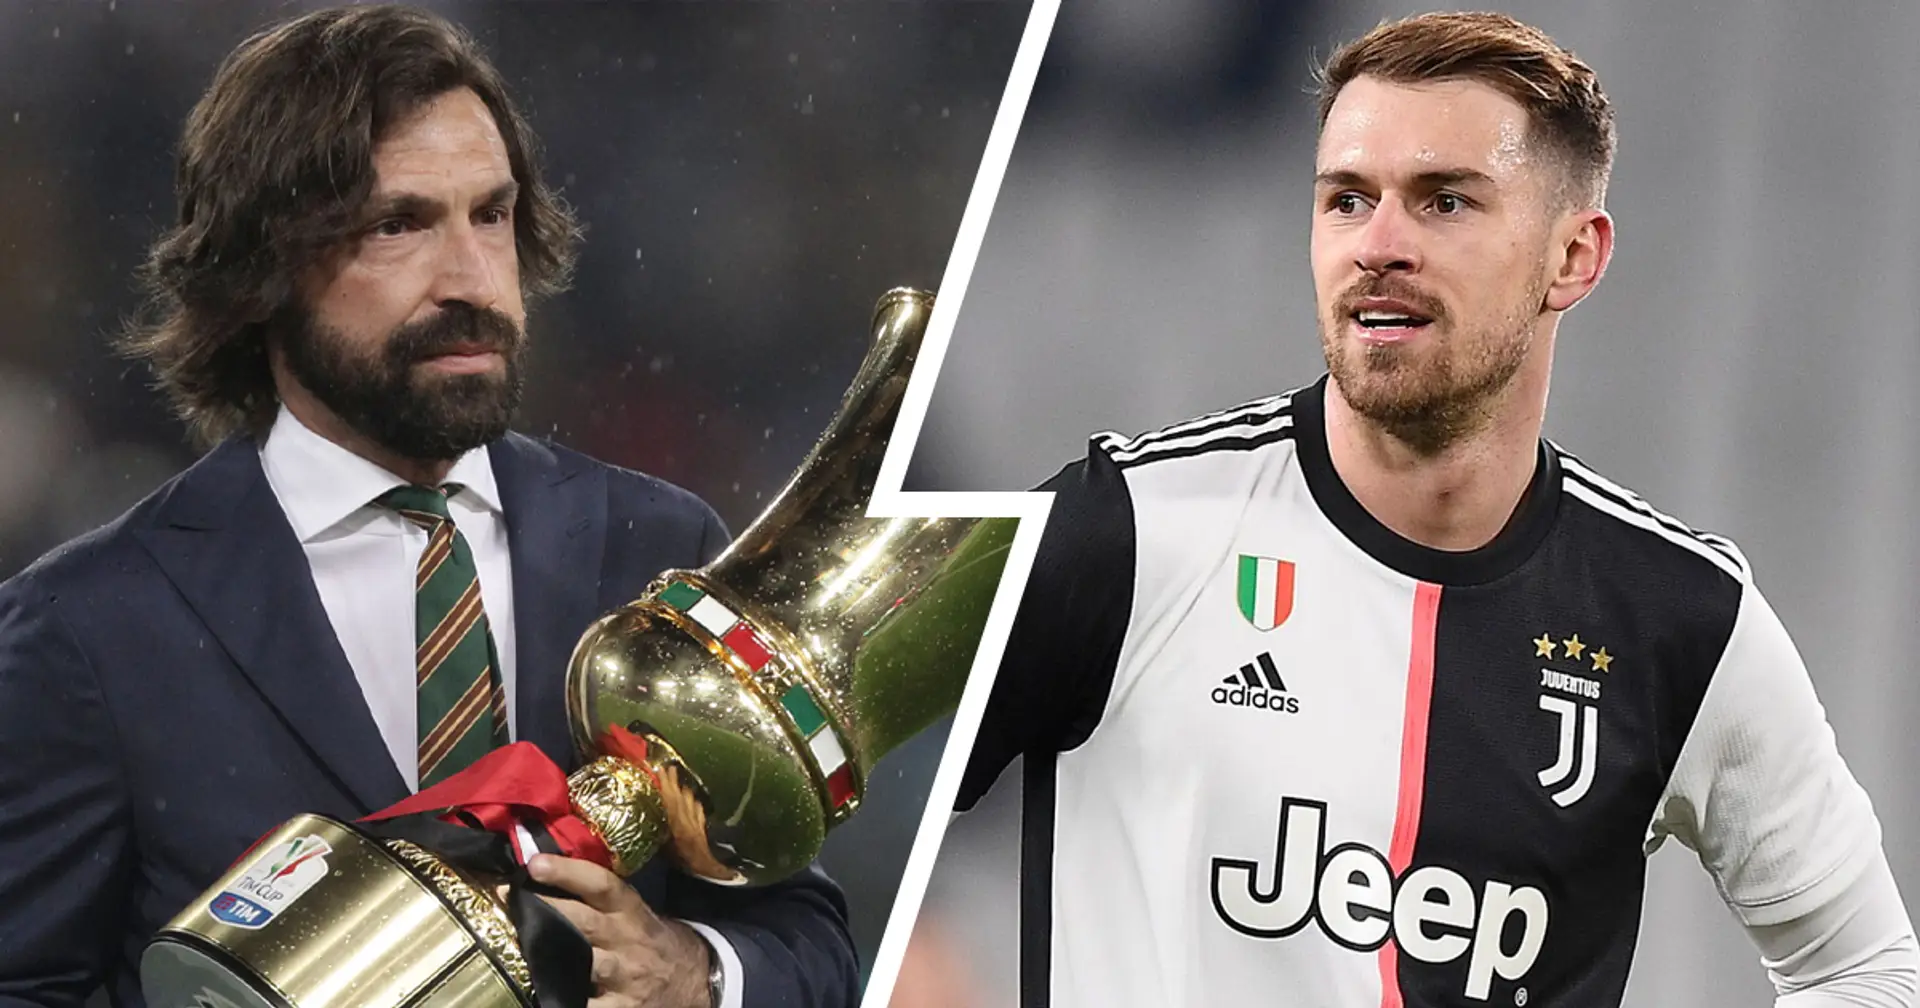 Sky Italy: Juventus boss Andrea Pirlo ready to offload Aaron Ramsey as part of team rebuild plans